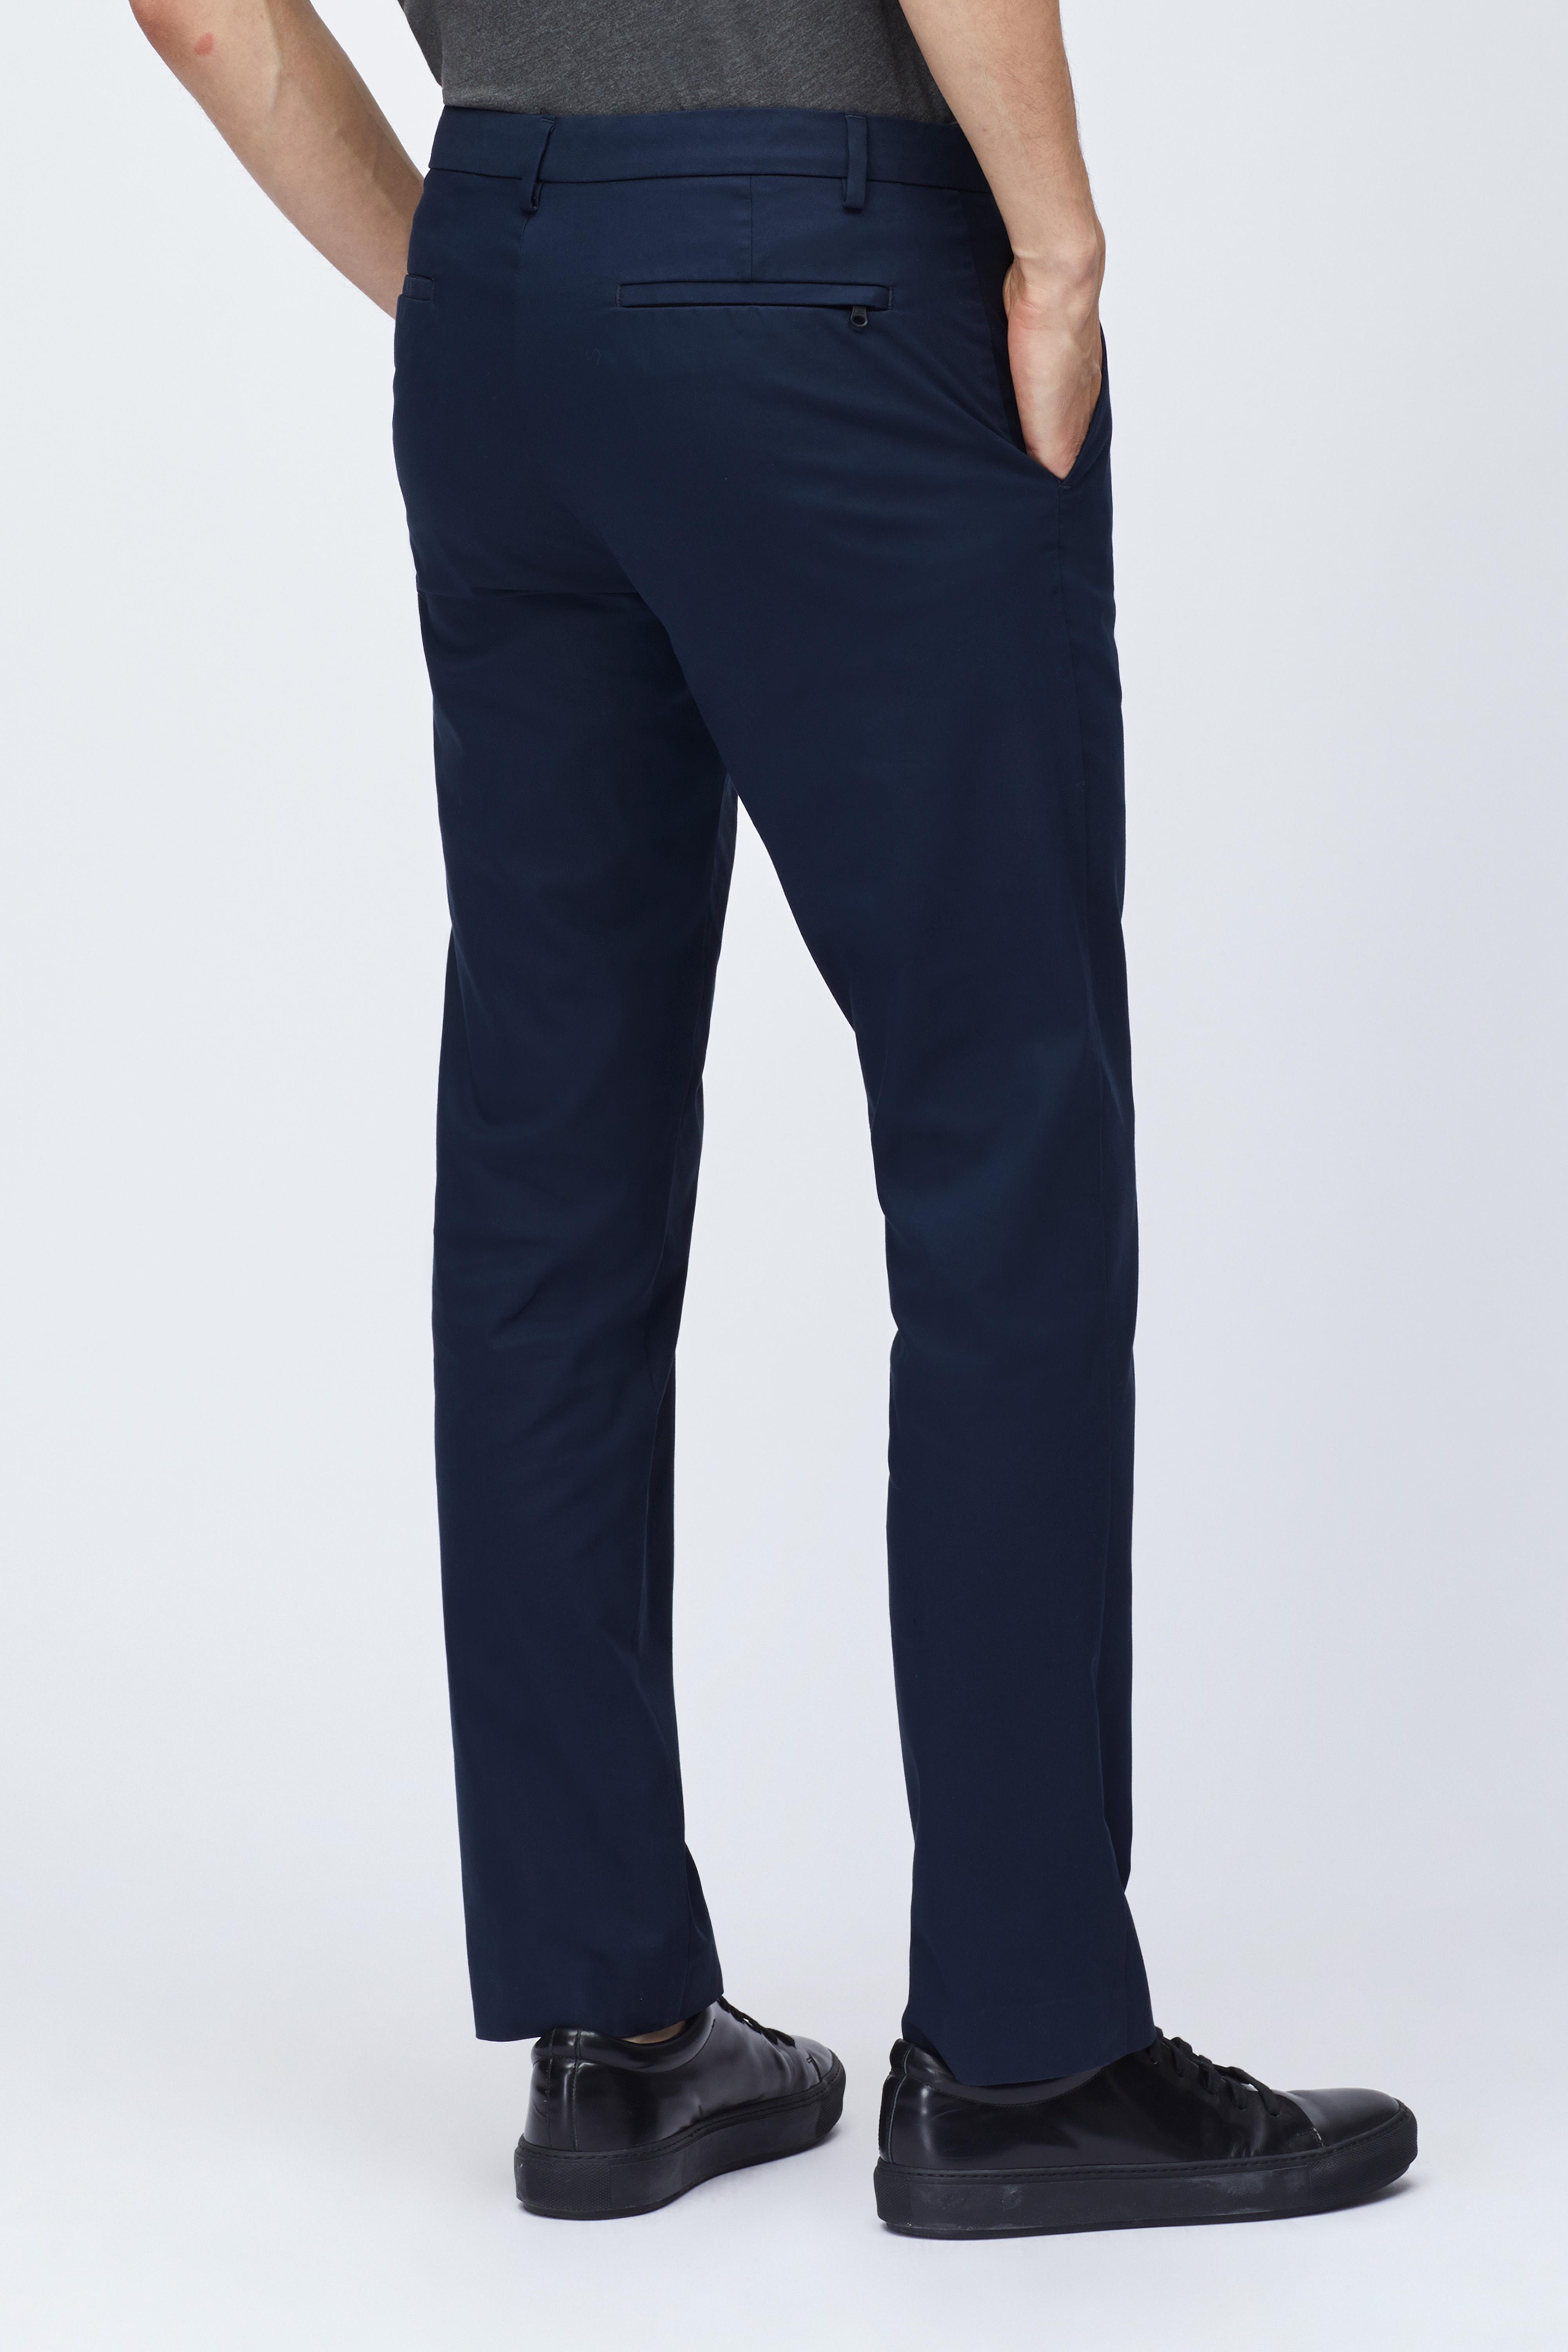 Bonobos Cotton Tech Chinos in Navy (Blue) for Men - Lyst